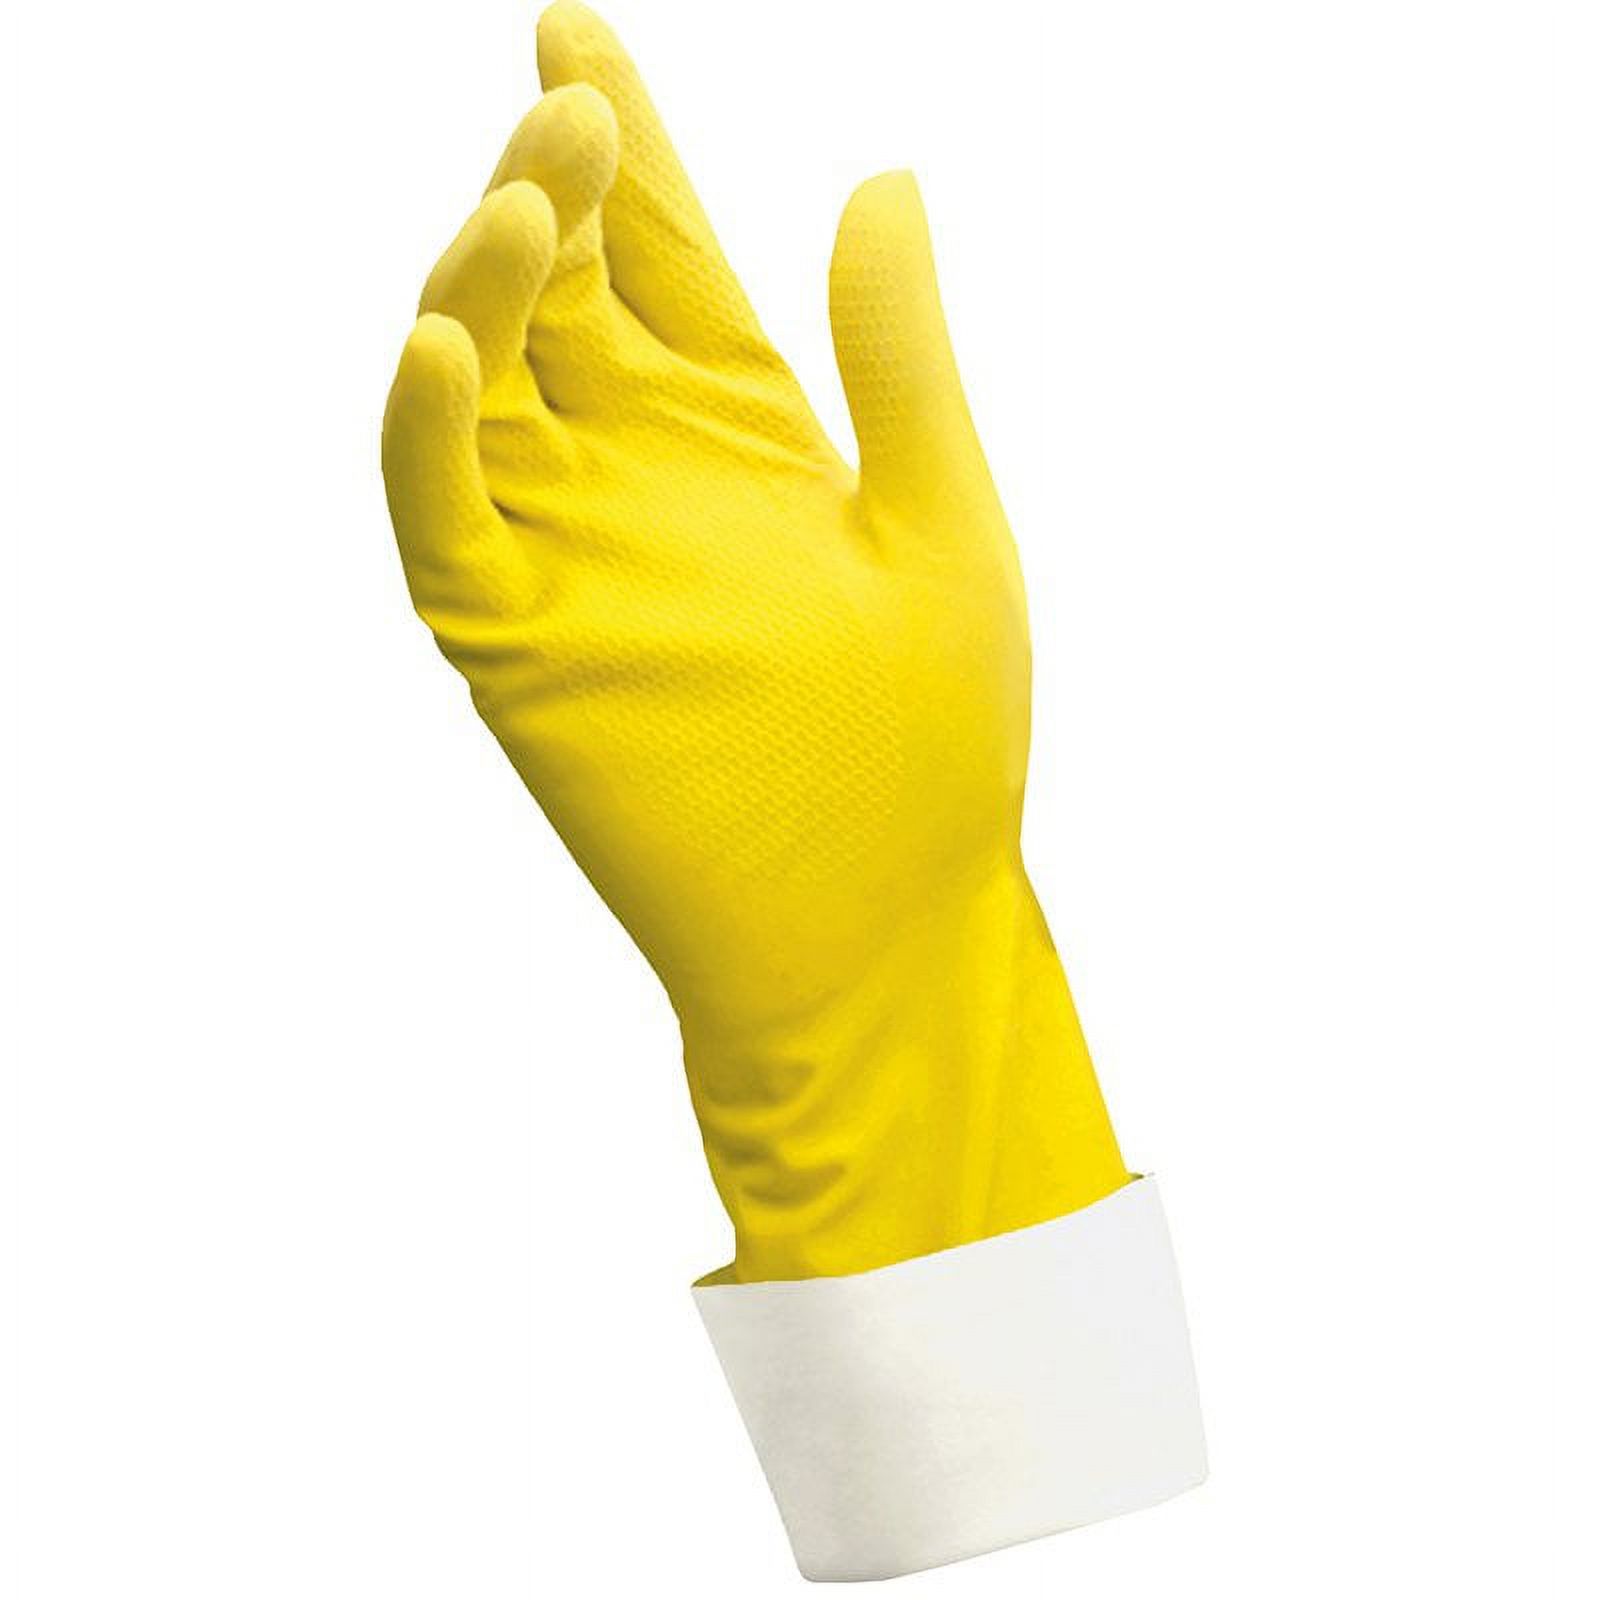 Big Time Products Reusable Premium Latex Gloves - image 1 of 1